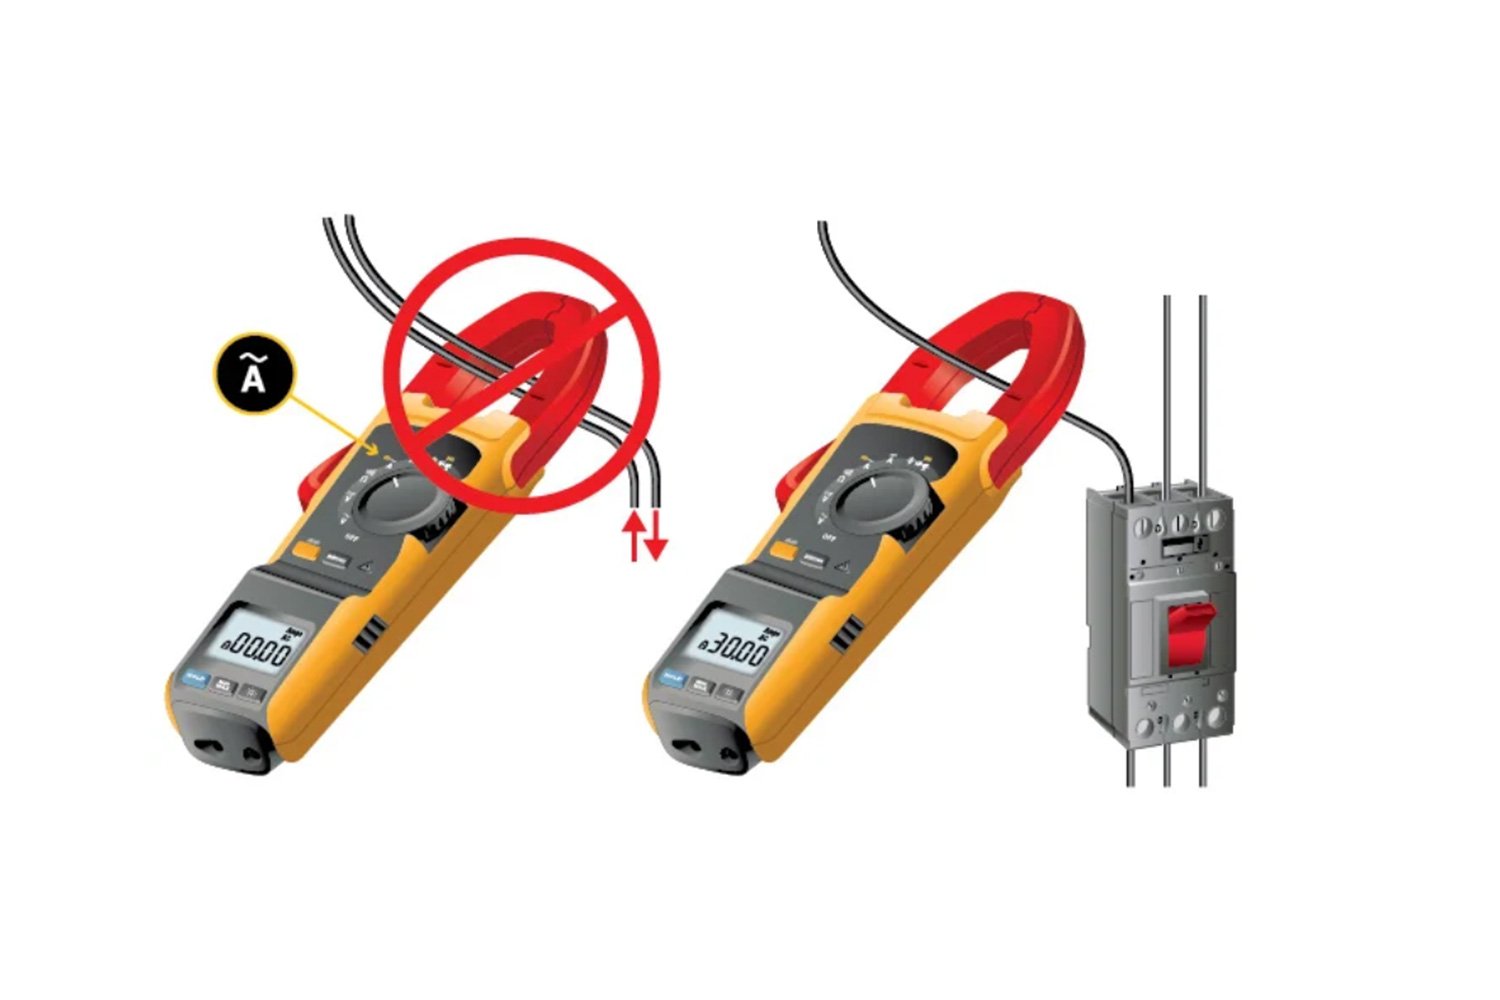 geur Dynamiek Ontaarden How to Measure Current with a Clamp Meter | Fluke